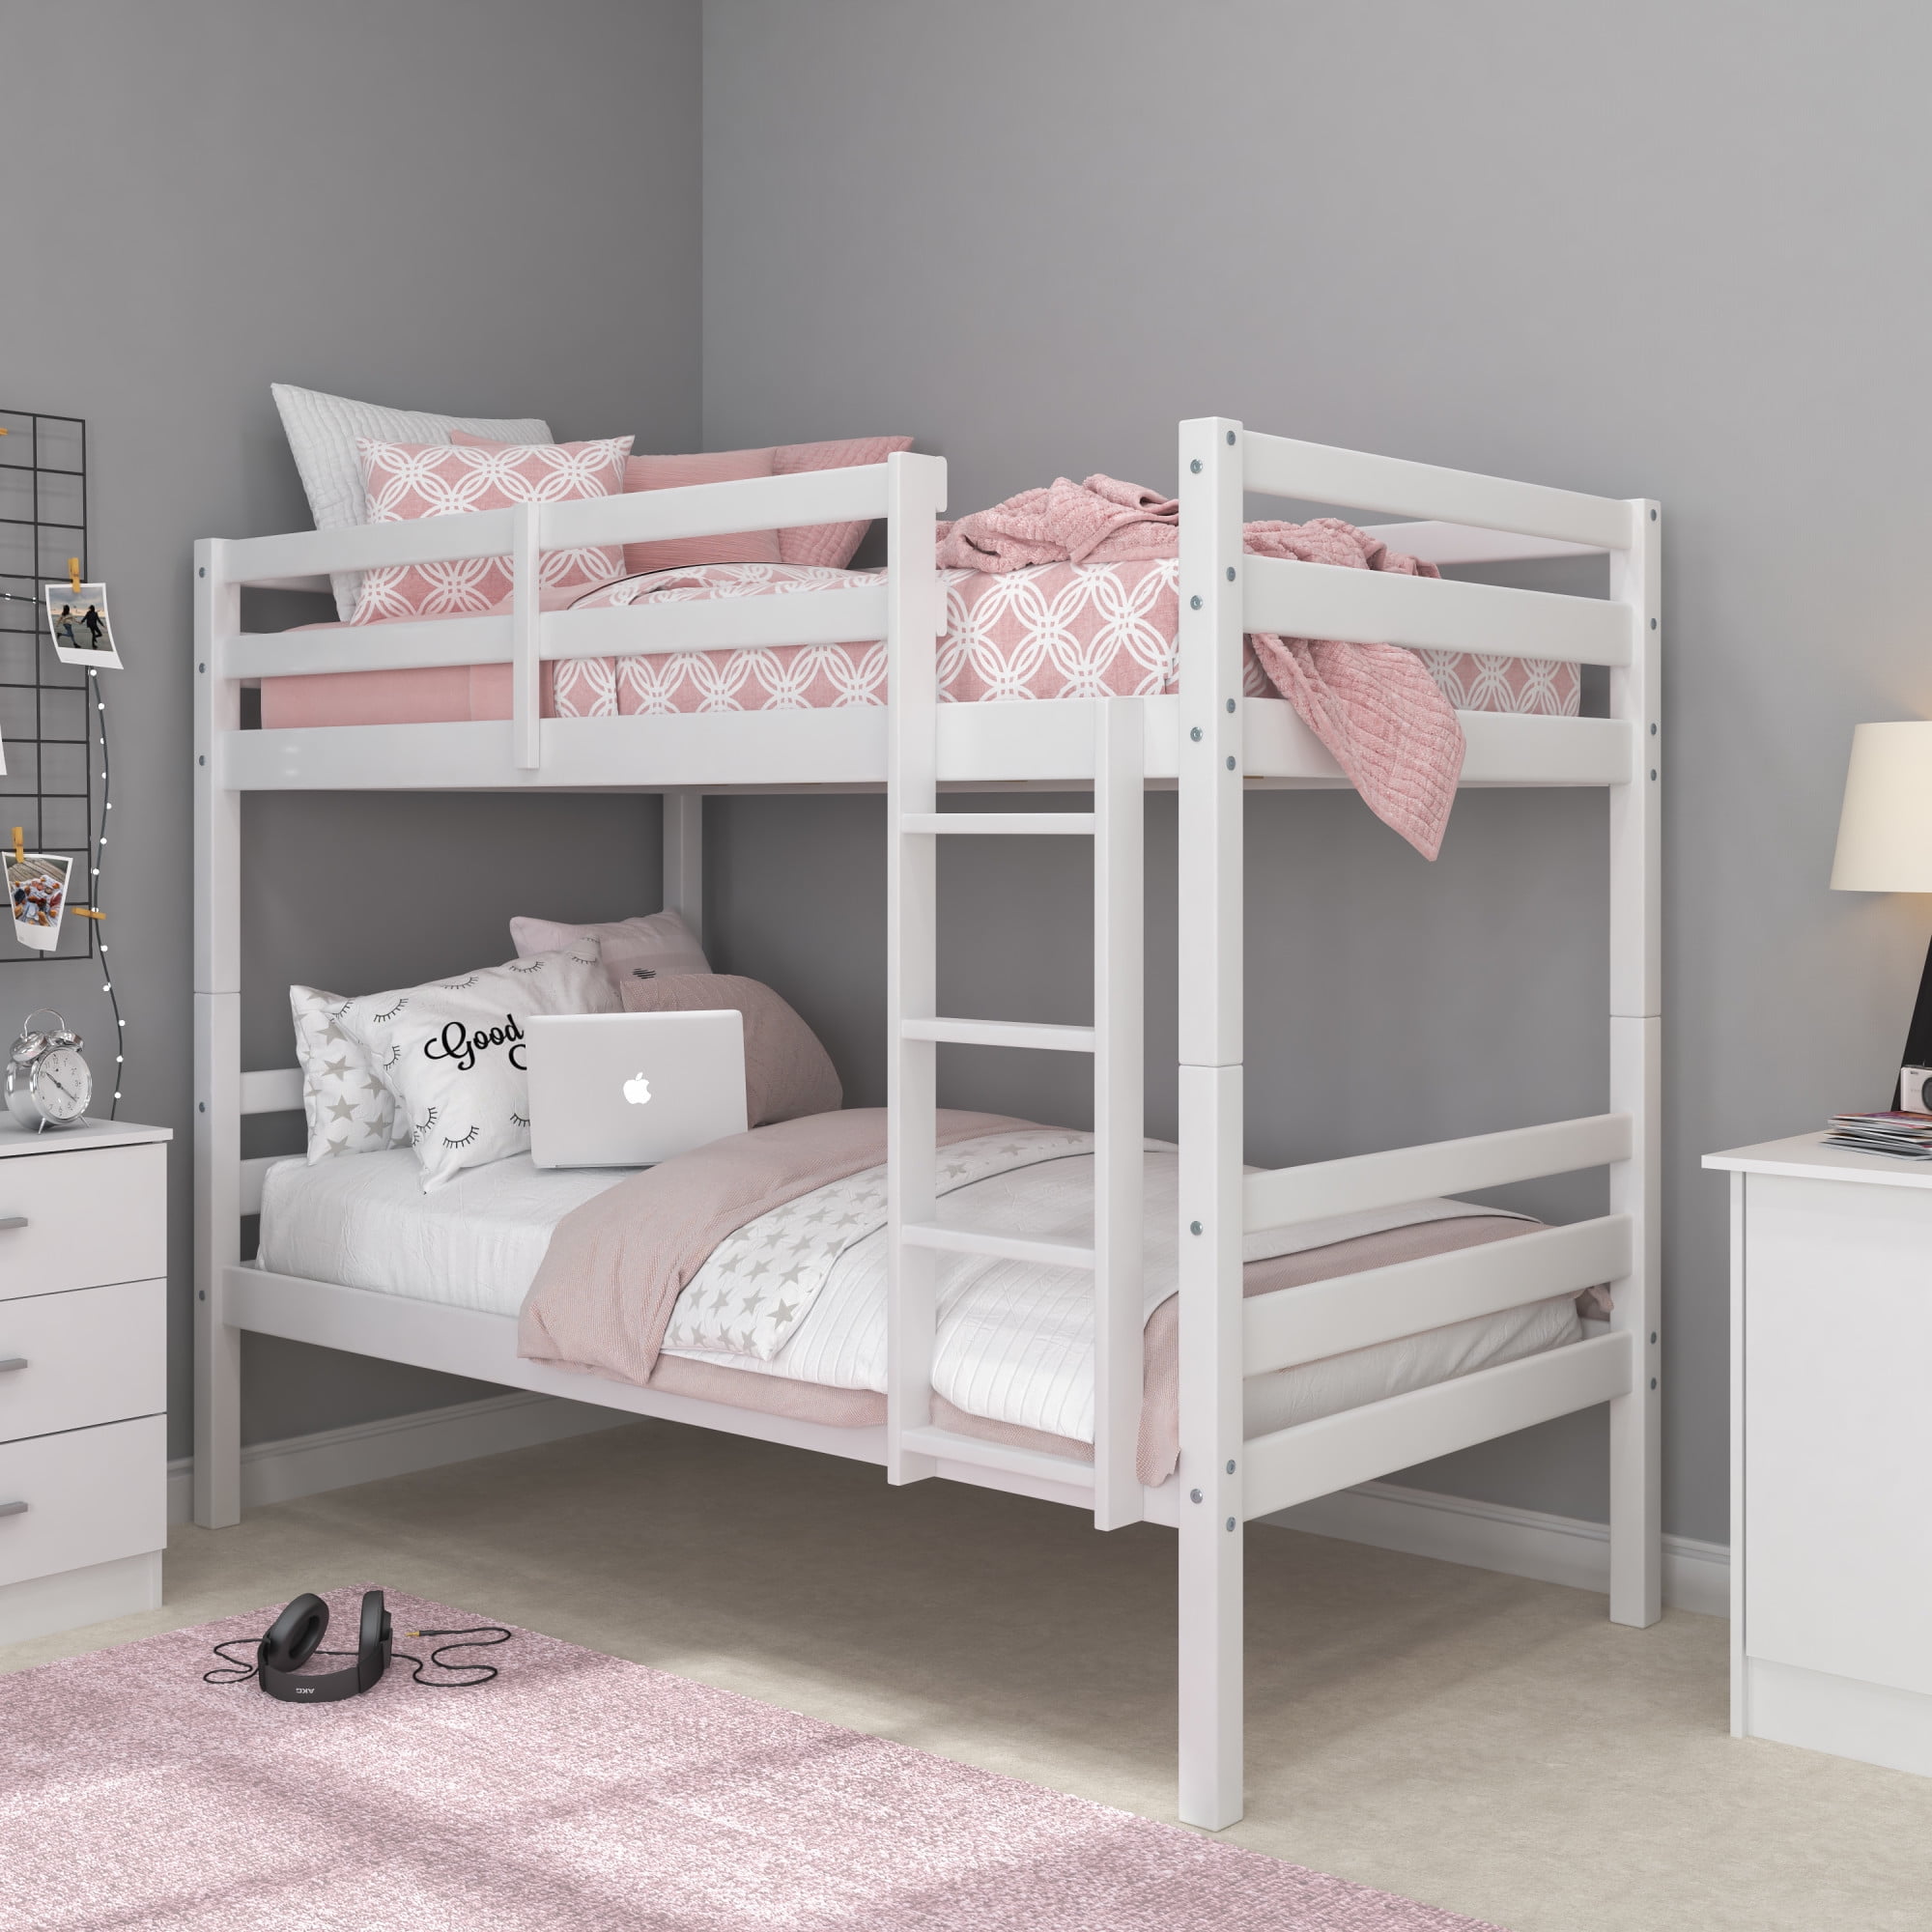 Campbell Wood Twin Over Bunk Bed, Bed And Bunks 2 Go